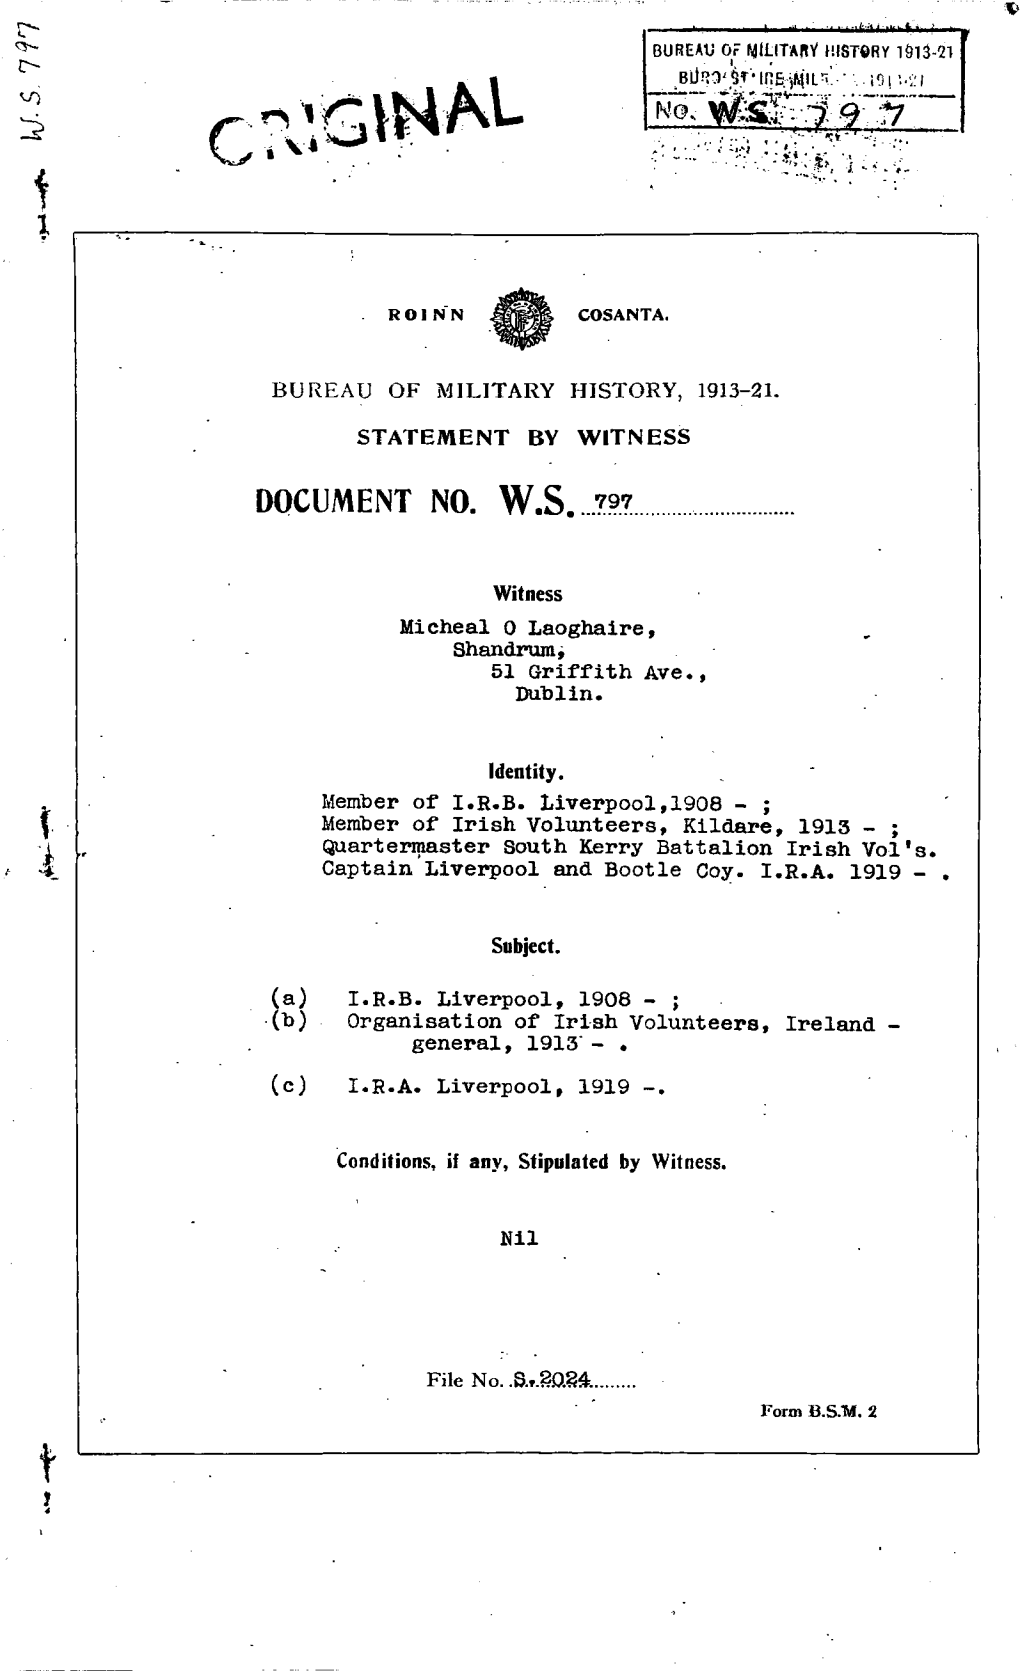 ROINN COSANTA. BUREAU of MILITARY HISTORY, 1913-21. STATEMENT by WITNESS DOCUMENT NO. W.S. 797 Witness Micheal O Laoghanire Shan